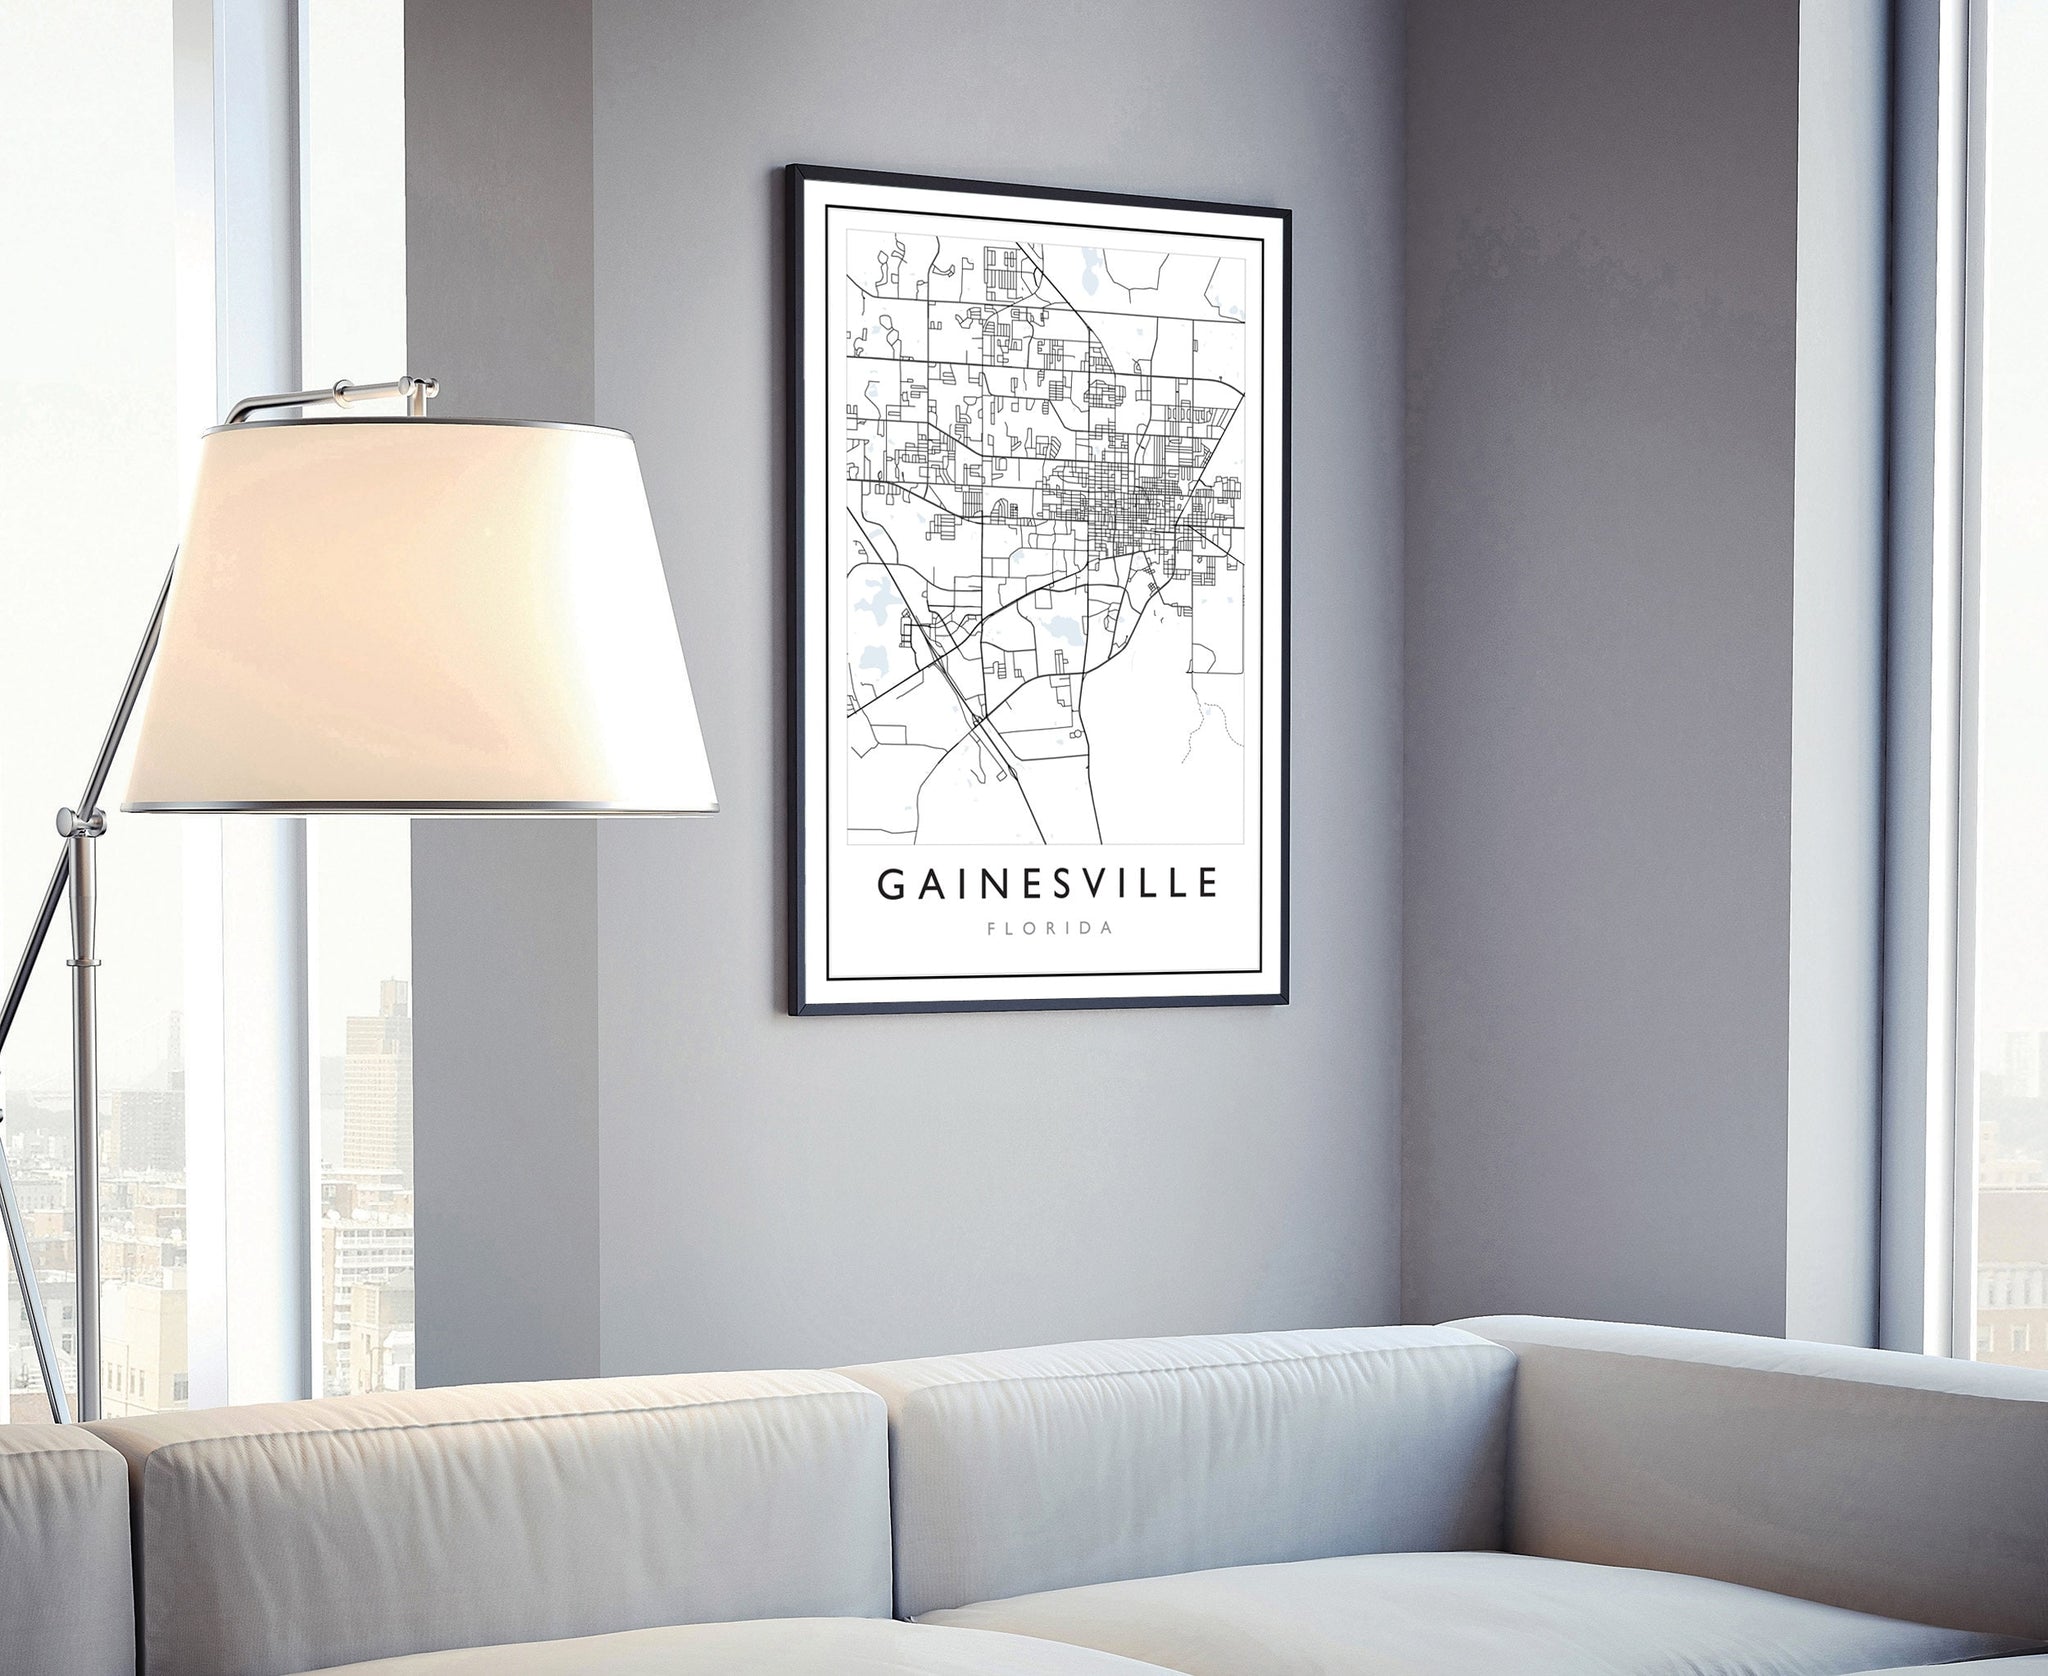 Gainesville Florida City Map, Florida City Road Map Poster, City Street Map Print, Modern US City Map, Home Art Decoration, Office Wall Art